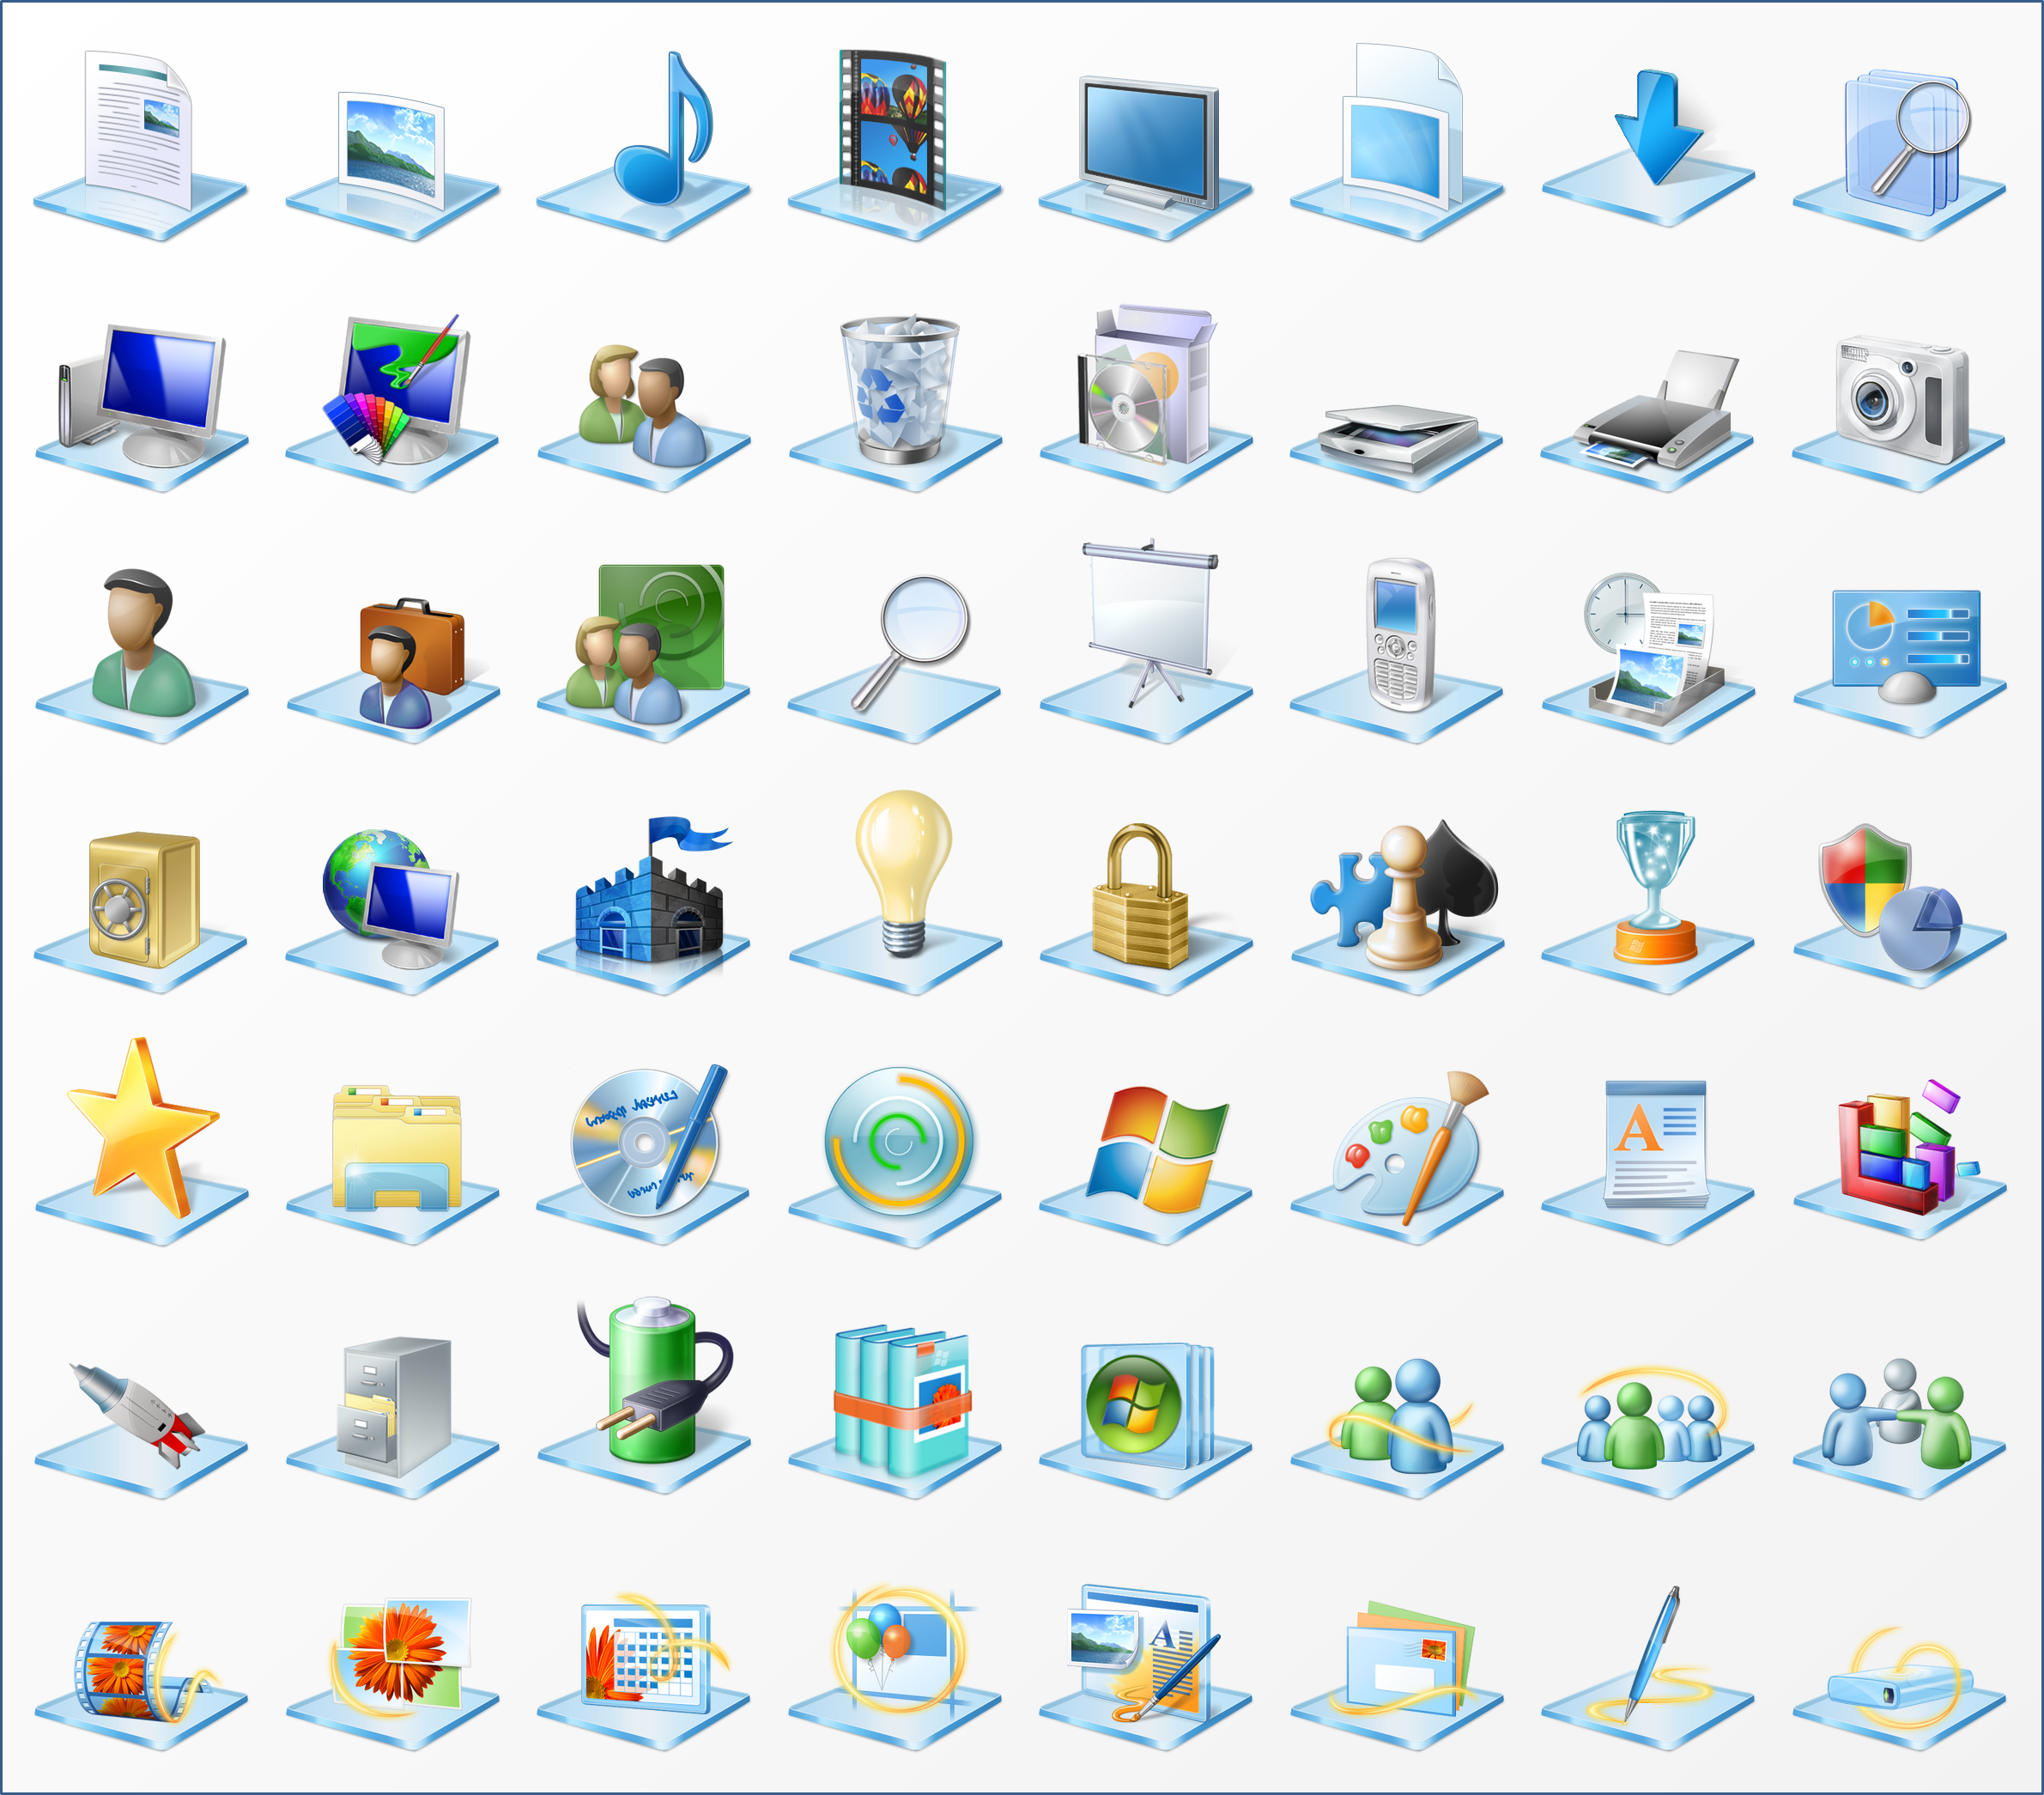 9 Windows 7 Library Icons Images